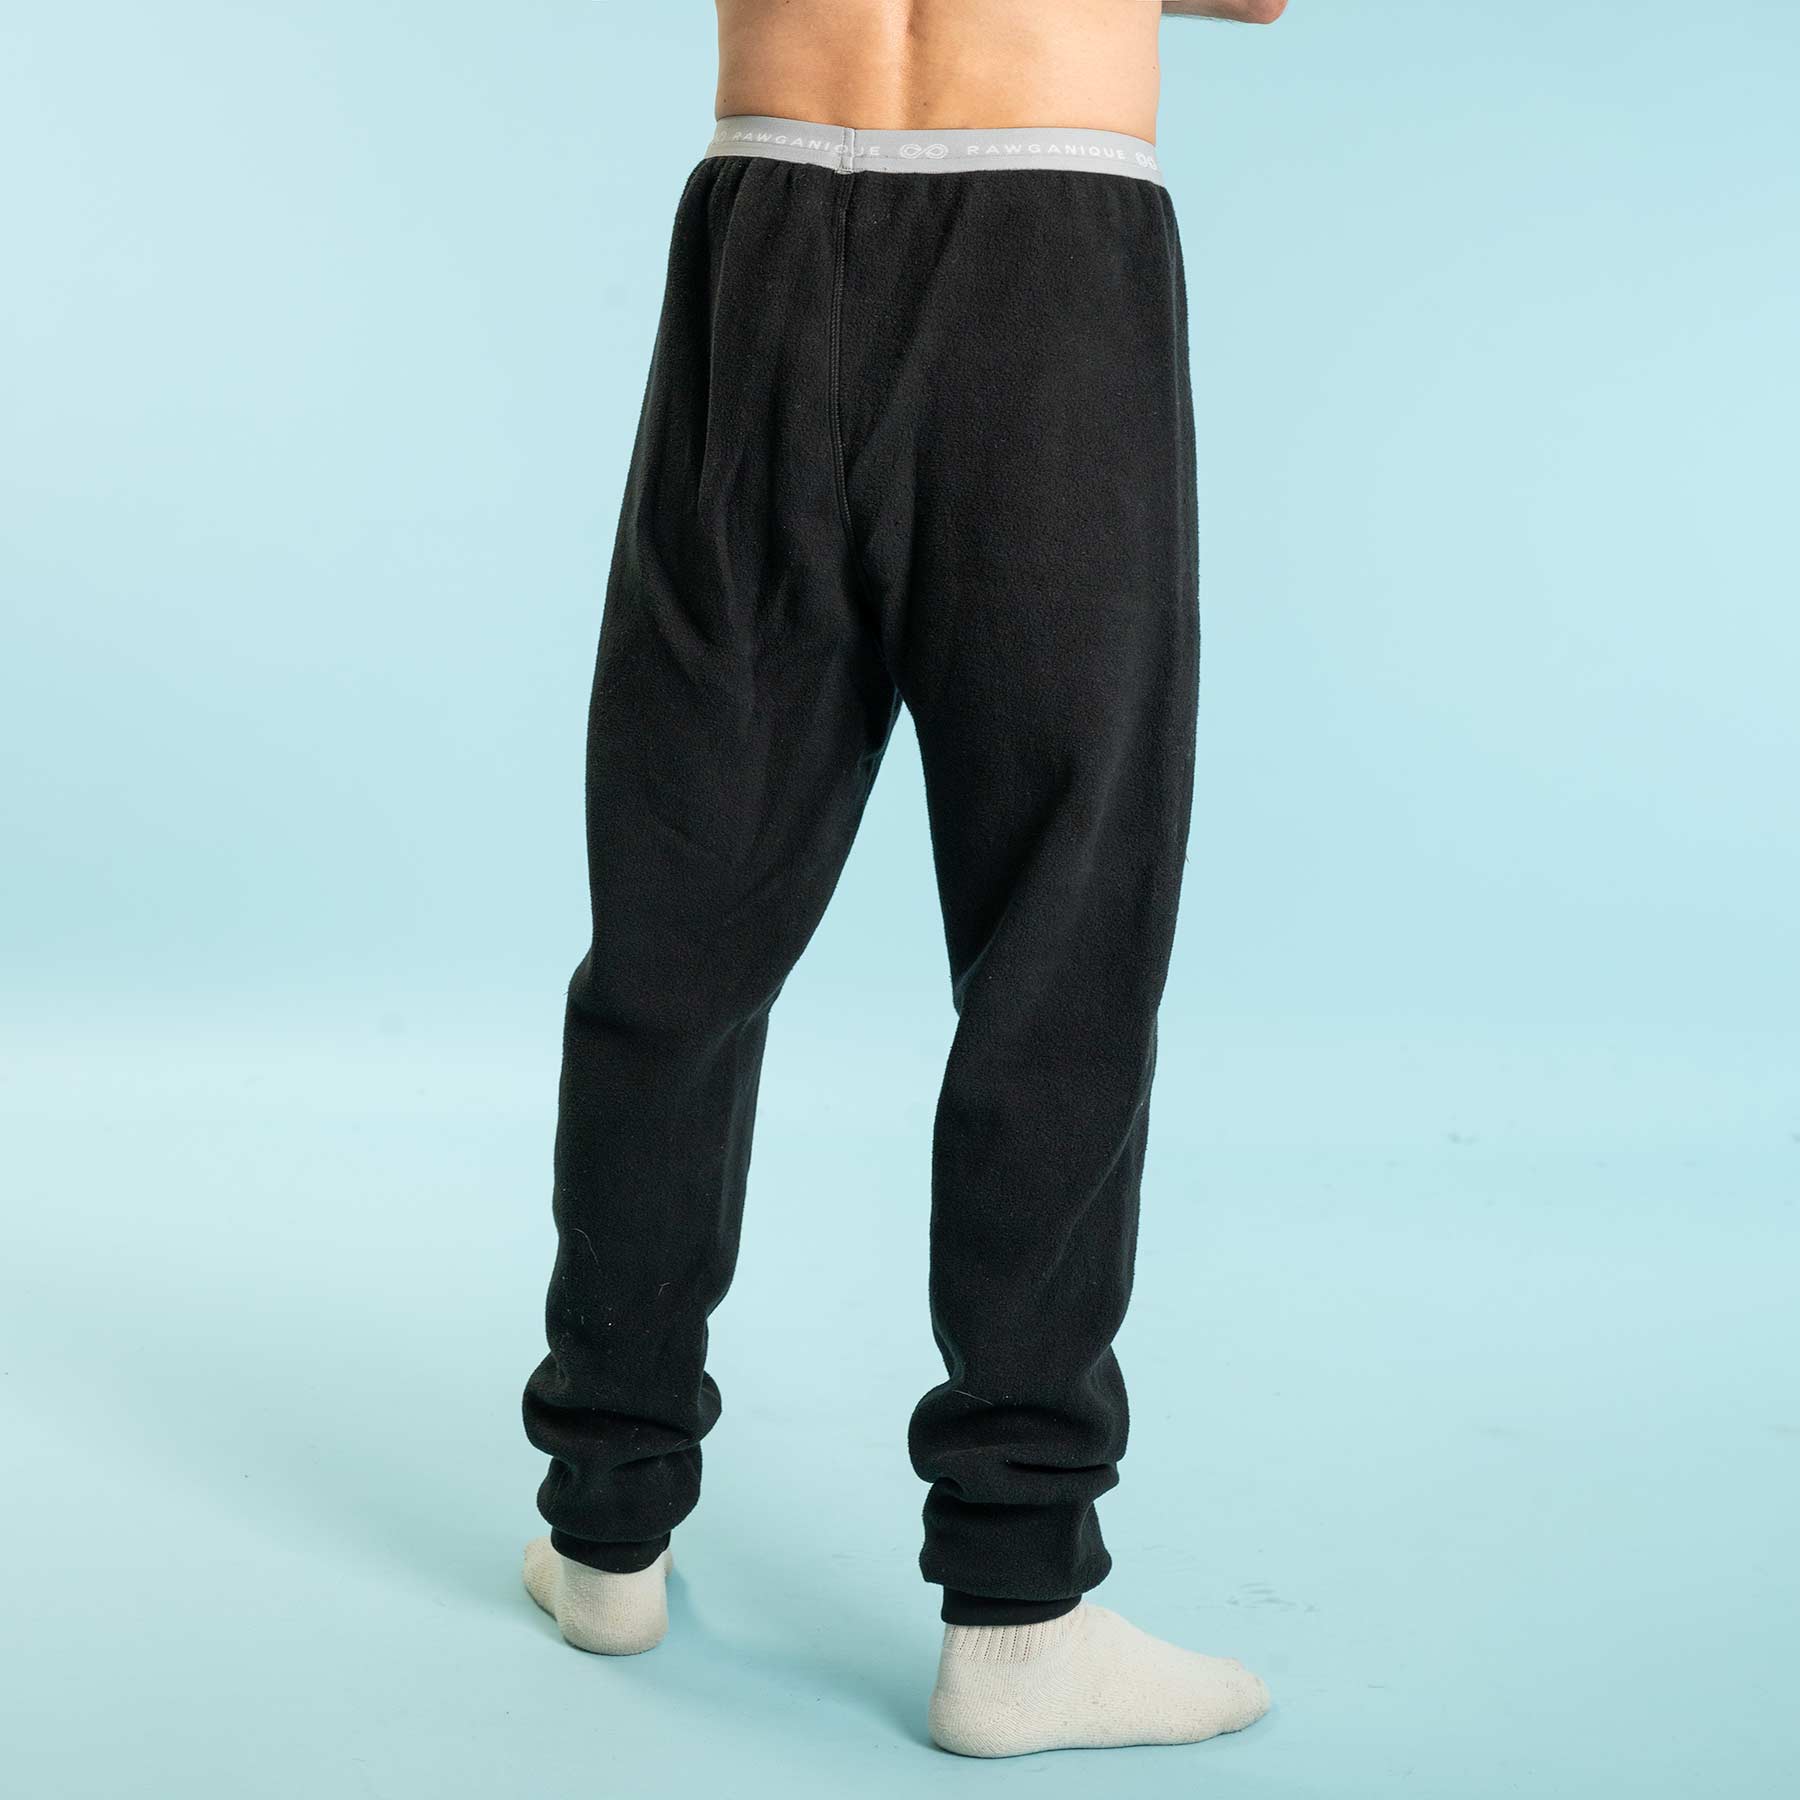 Mens Winter 100% Cotton Thermal Warm Fleece Lined Long Johns